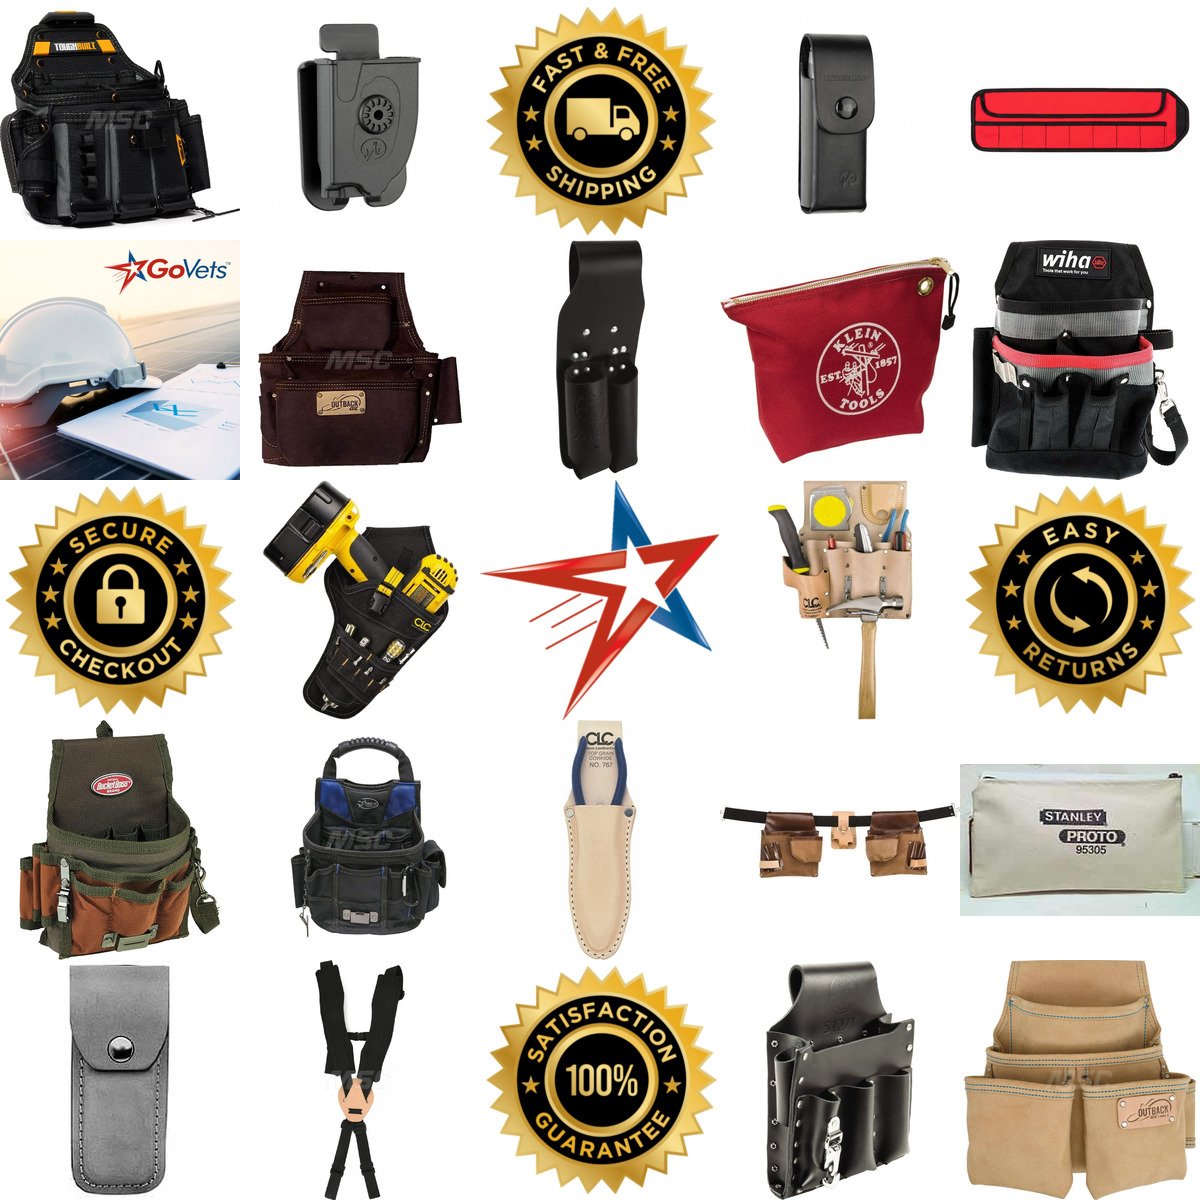 A selection of Tool Pouches and Holsters products on GoVets